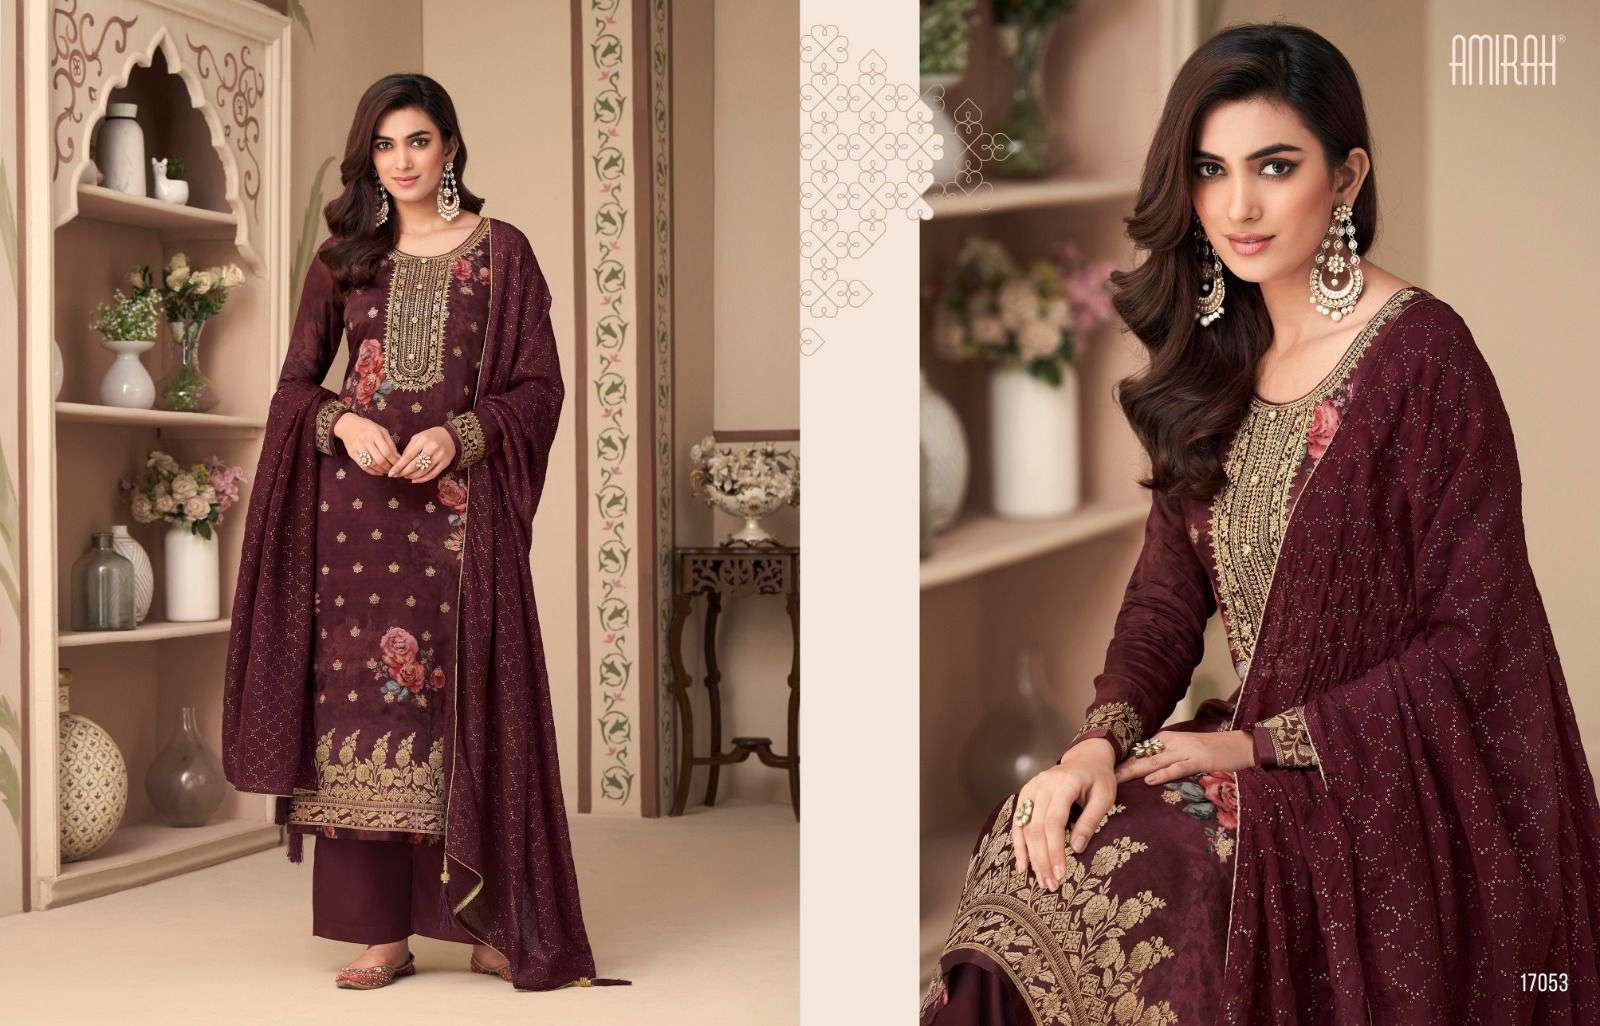 Feeza By Amirah 17051 To 17056 Series Beautiful Suits Colorful Stylish Fancy Casual Wear & Ethnic Wear Pure Silk Jacquard Dresses At Wholesale Price